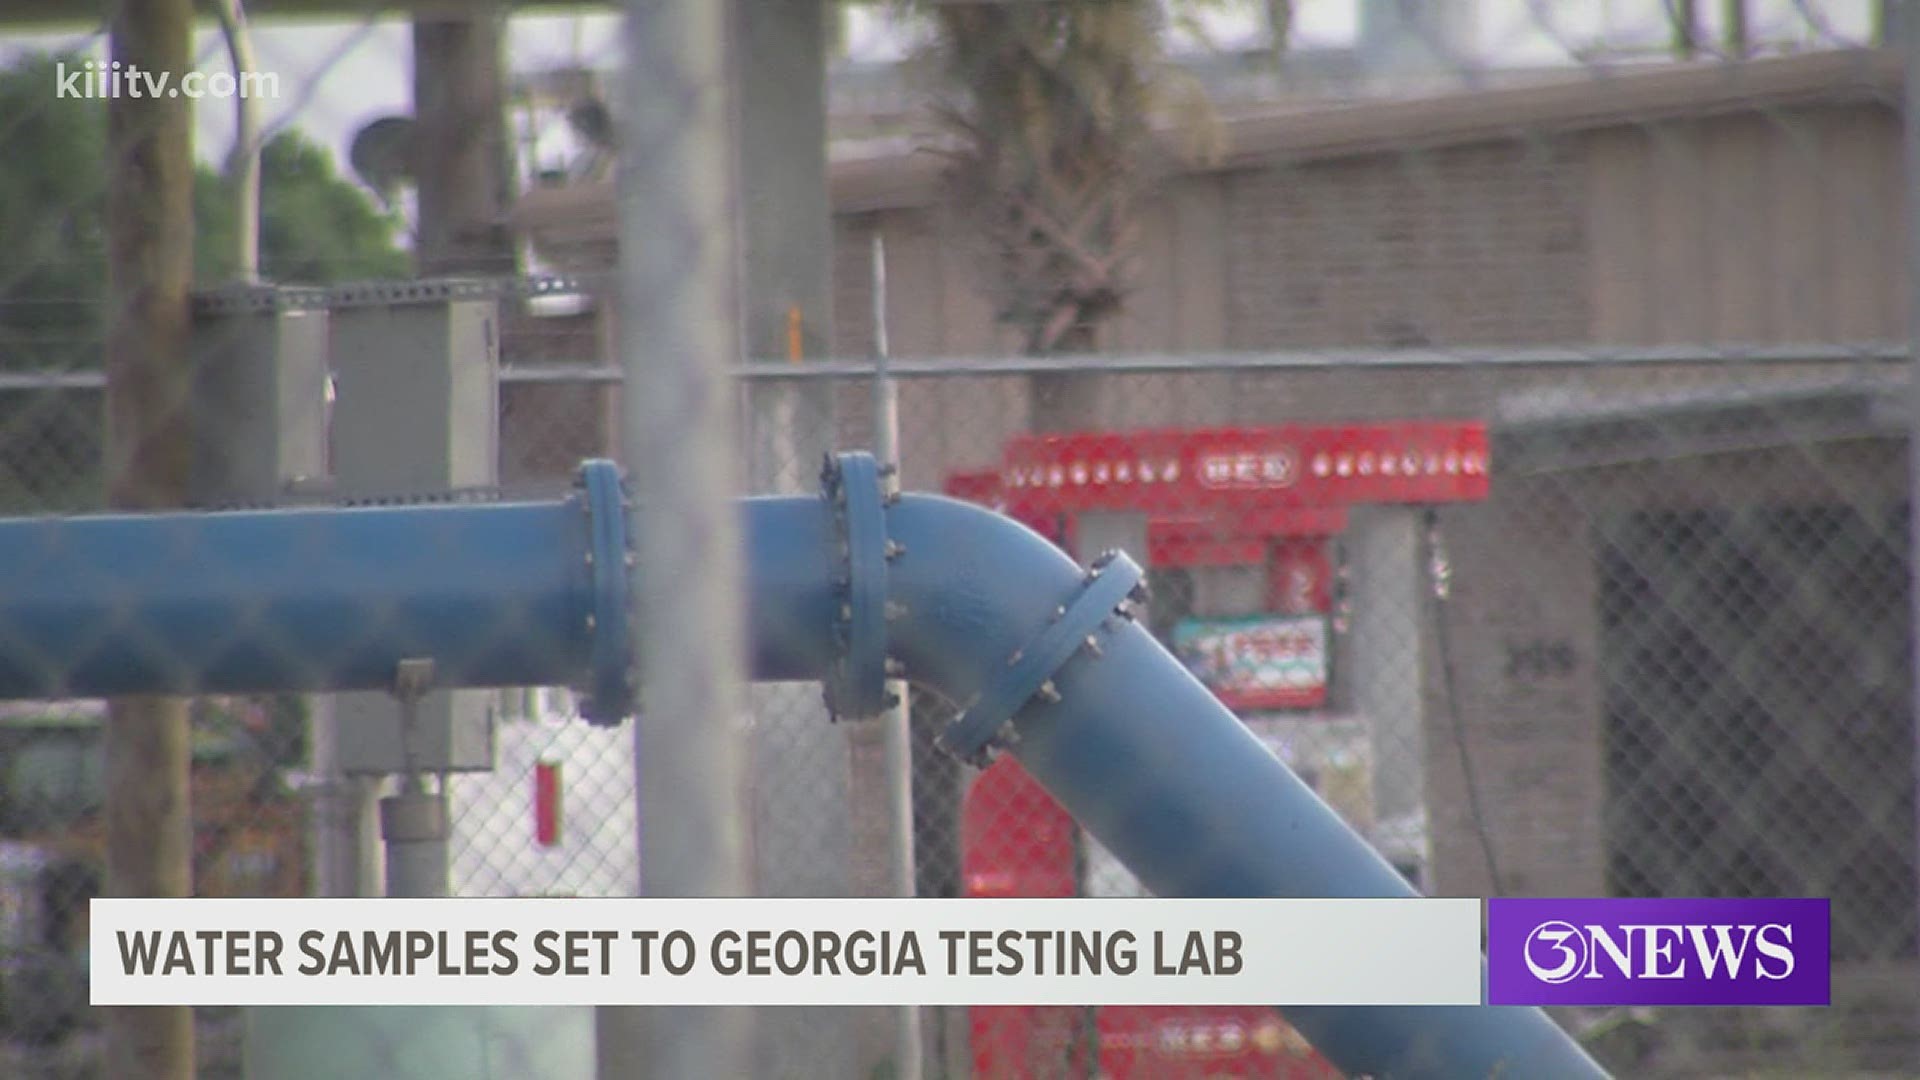 Over the last 24 hours crews have been taking samples from all over the city that will need to be tested at a lab in Georgia.